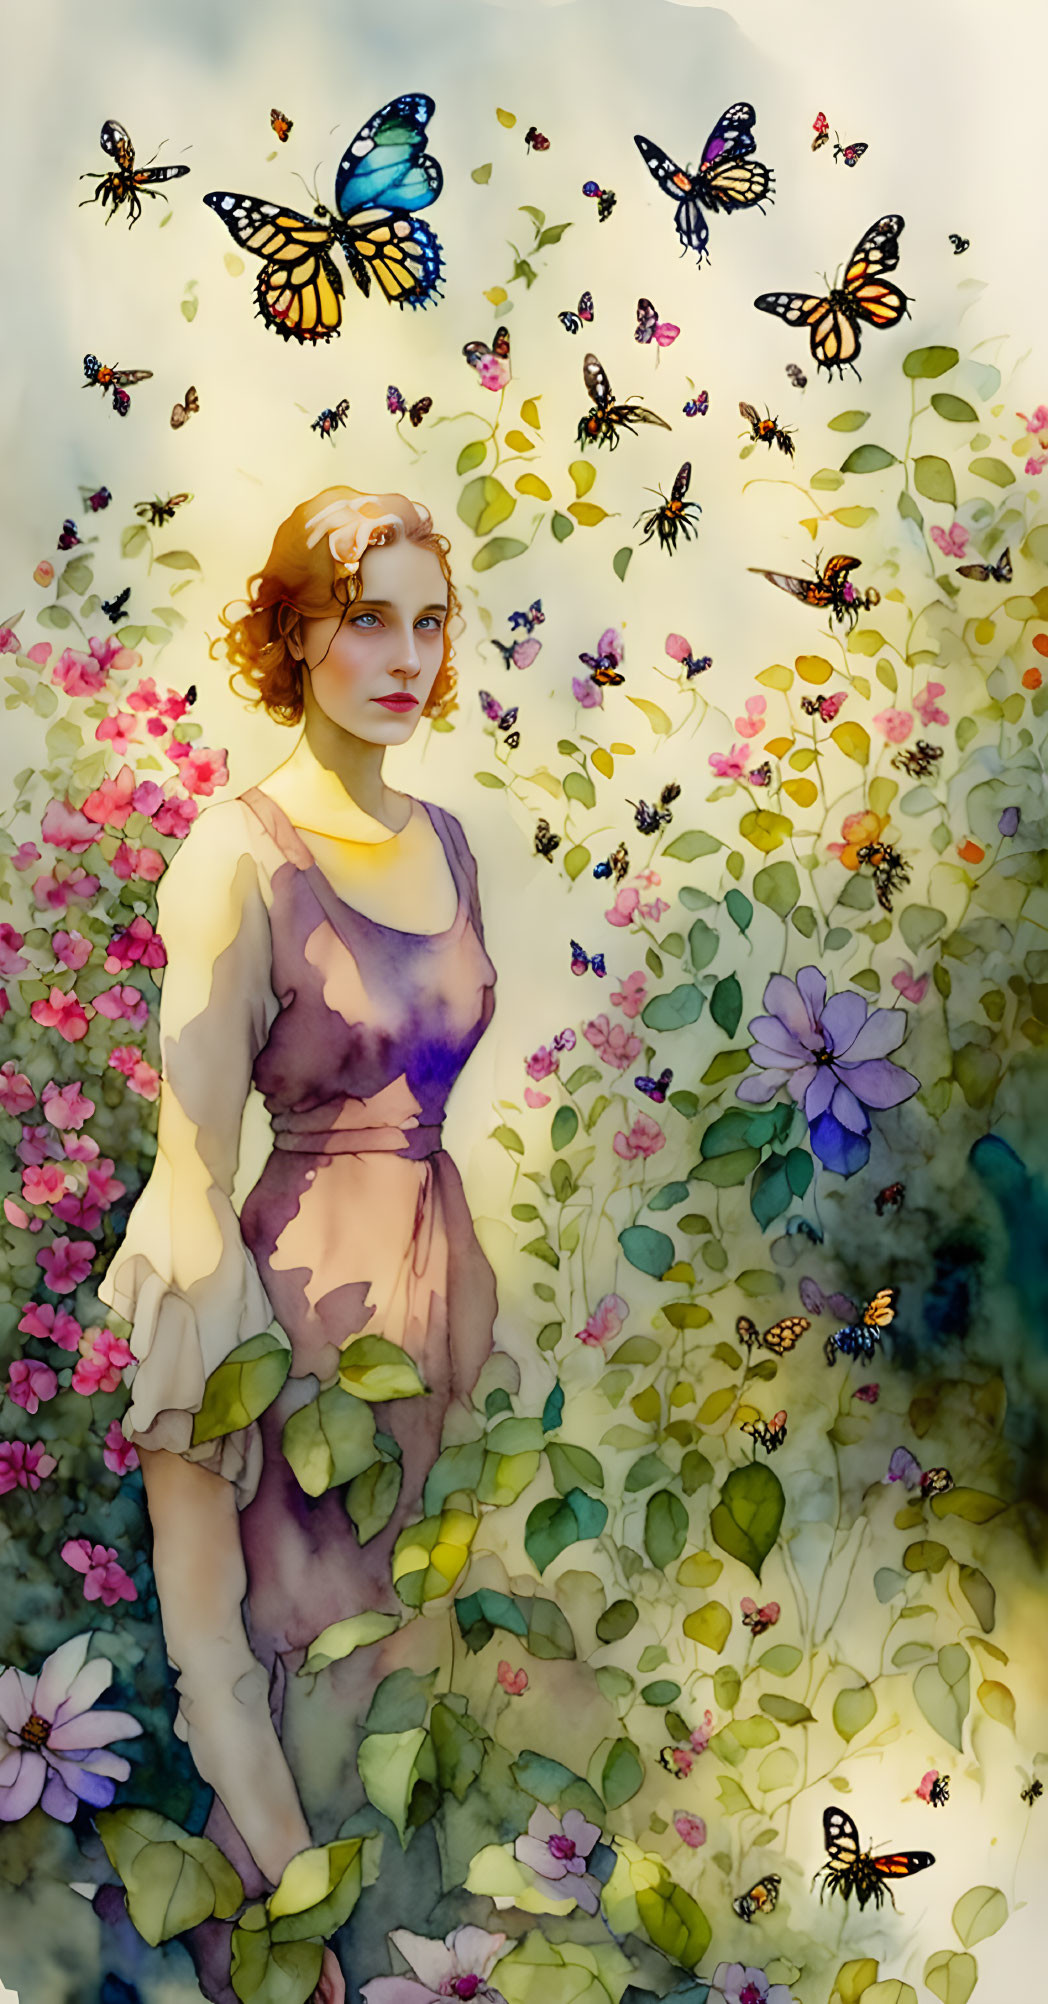 Illustration of woman in vibrant garden with flowers and butterflies.